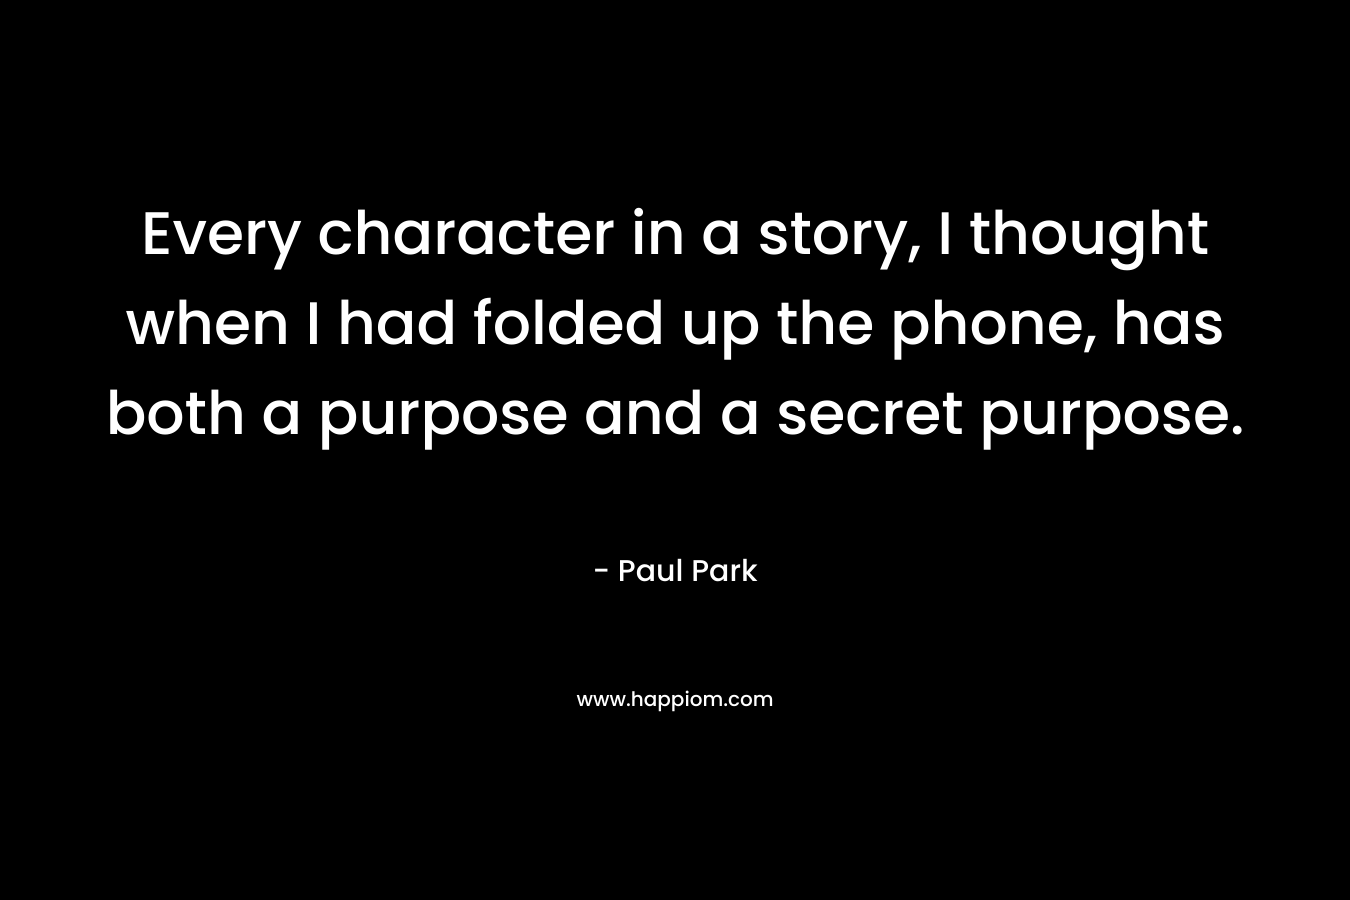 Every character in a story, I thought when I had folded up the phone, has both a purpose and a secret purpose. – Paul Park